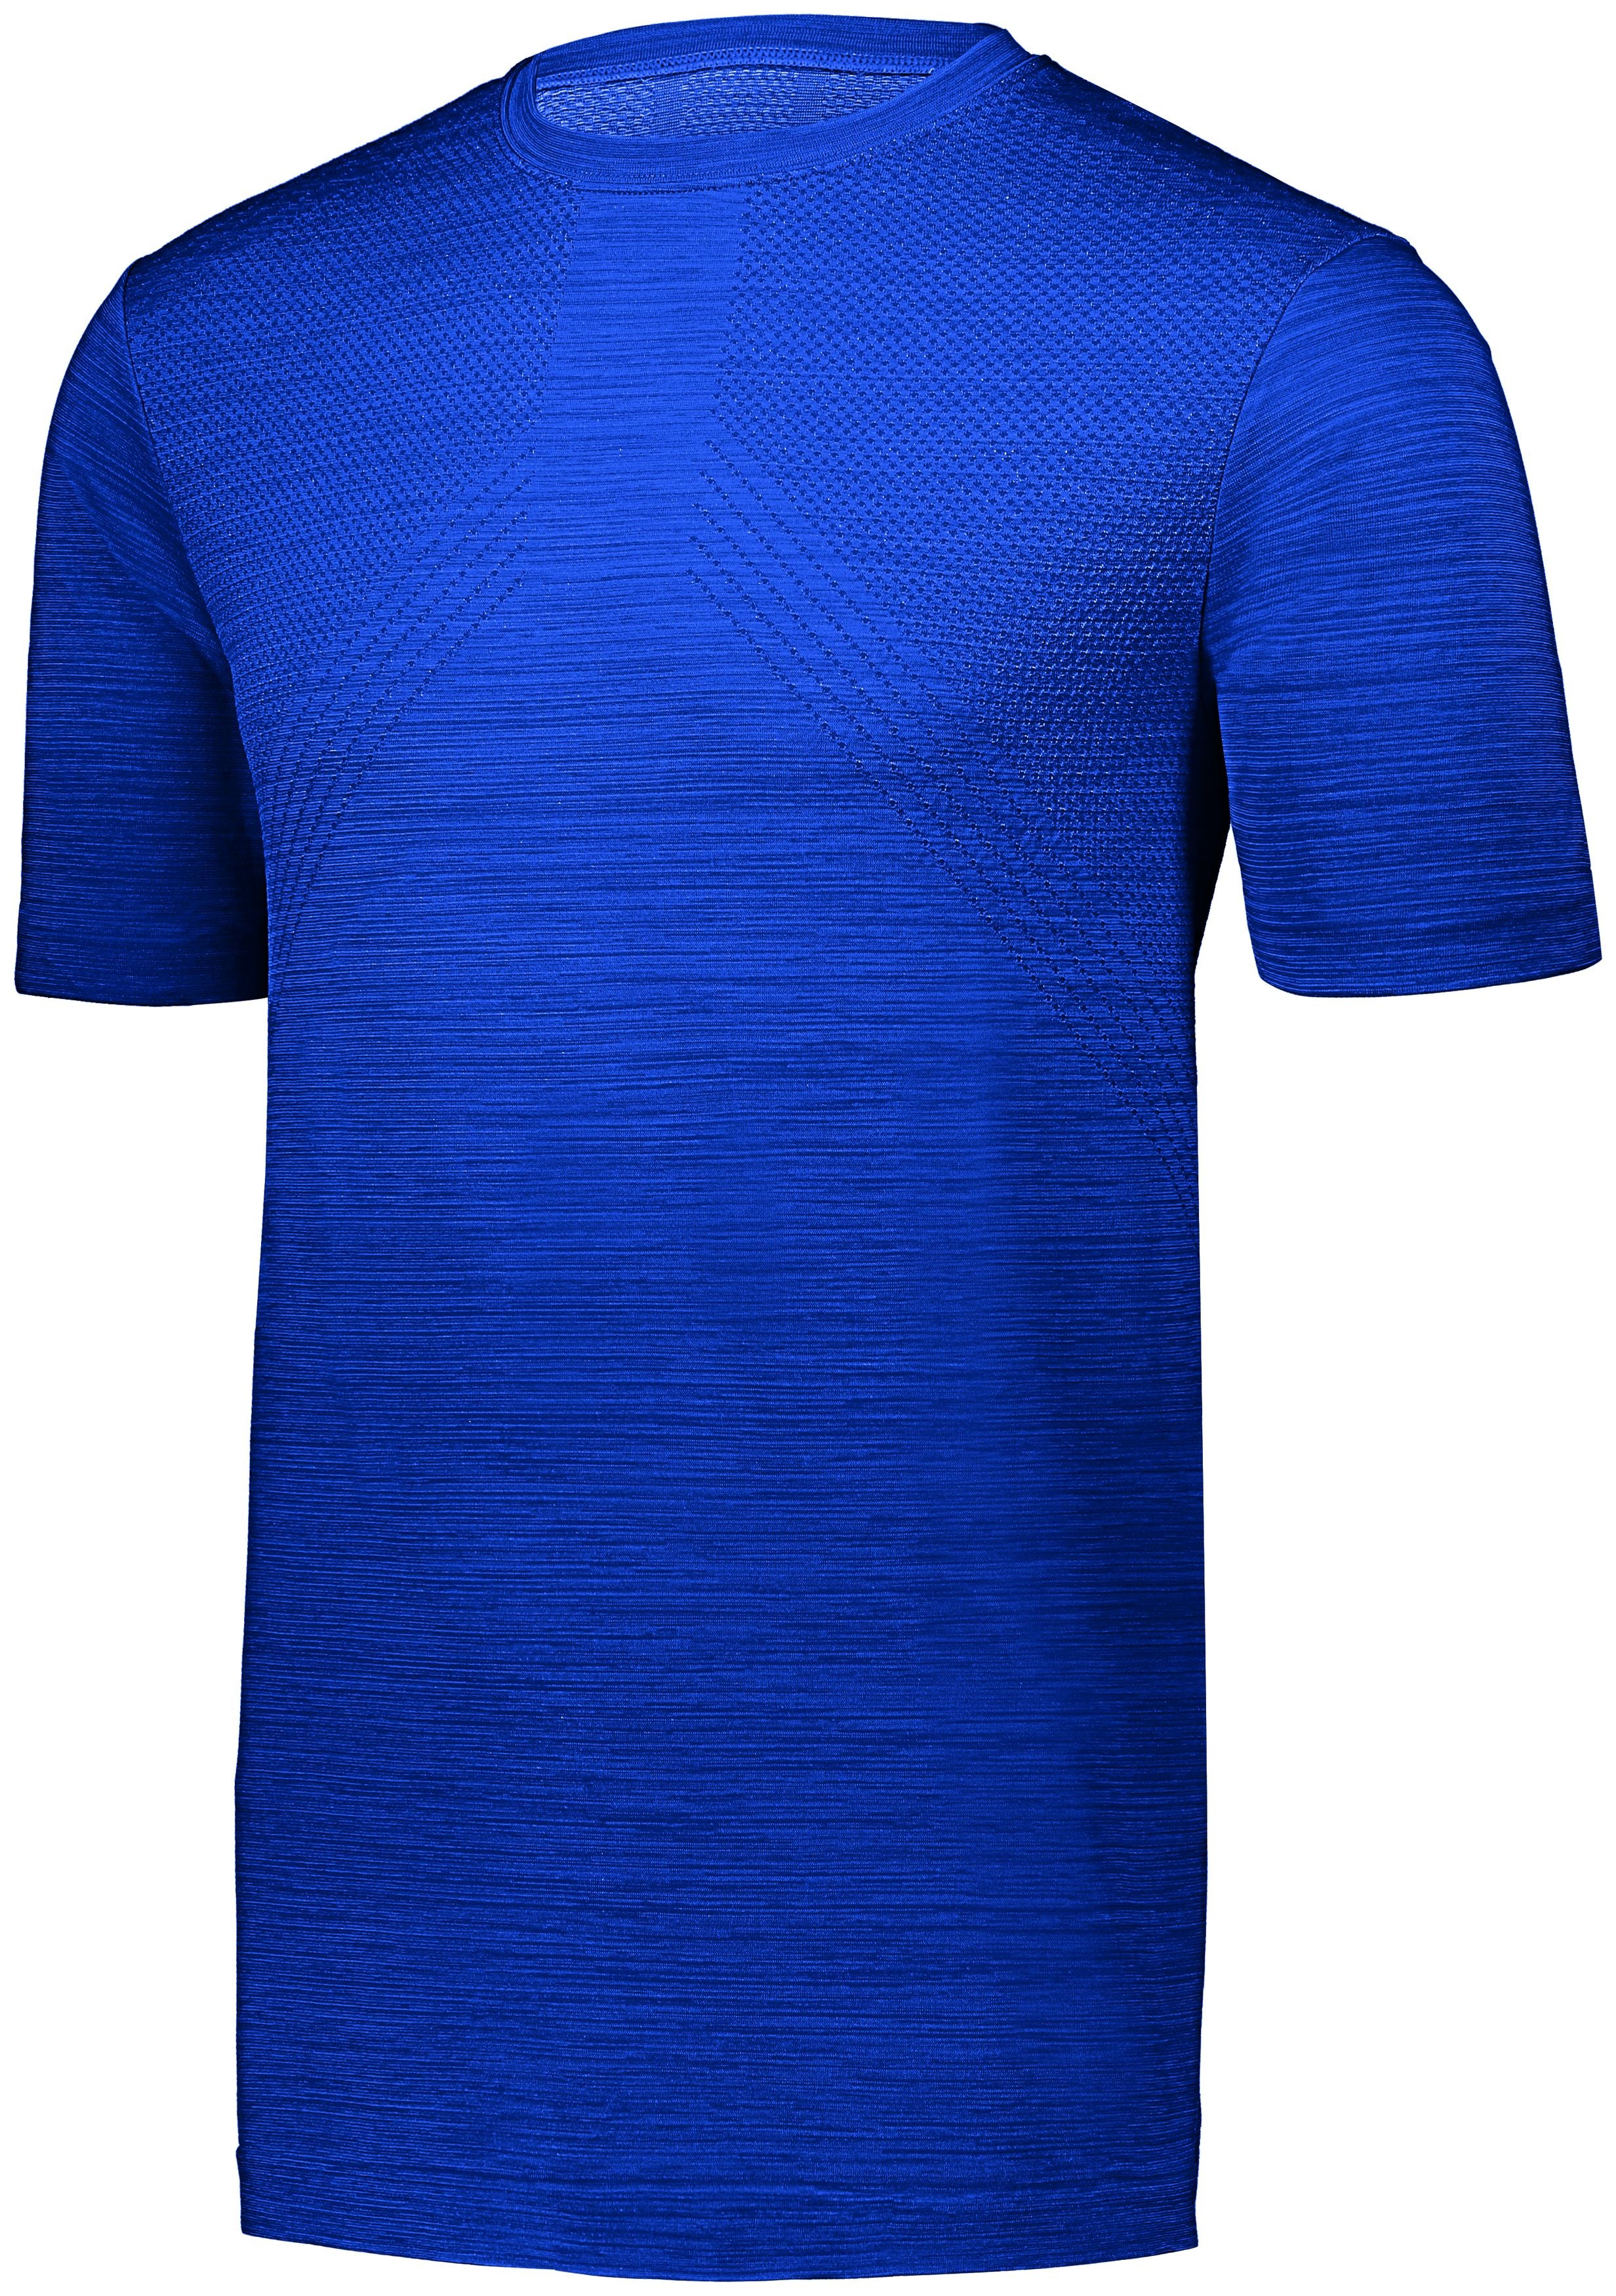 Holloway Striated Shirt Short Sleeve in Royal  -Part of the Adult, Holloway, Shirts, Striated-Collection product lines at KanaleyCreations.com